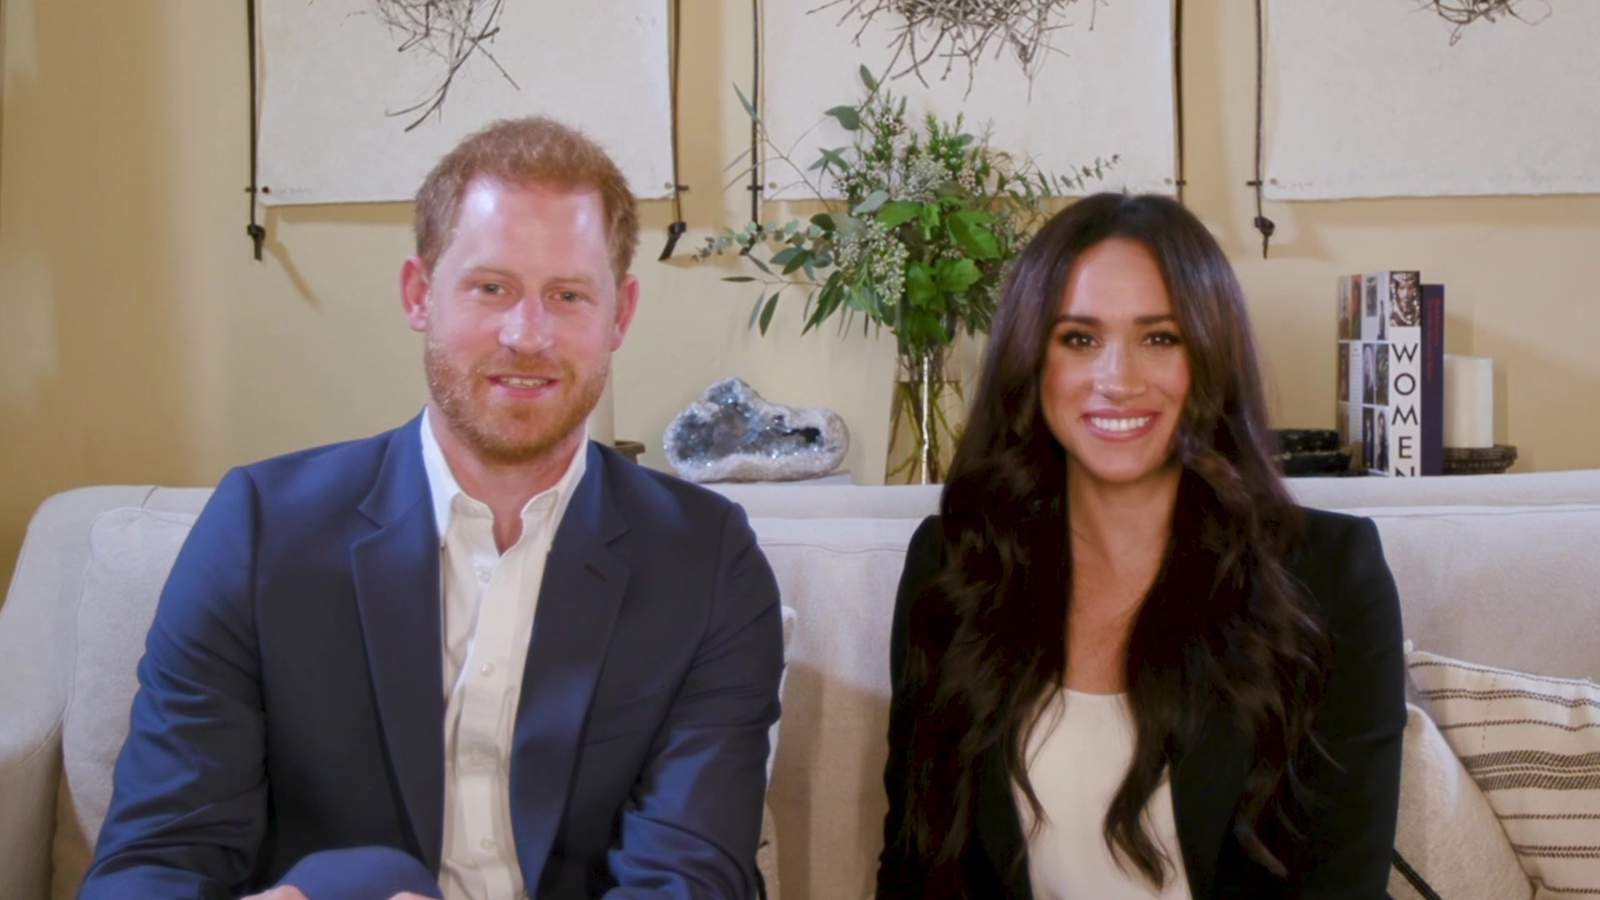 Duke and Duchess of Sussex convene session on digital world